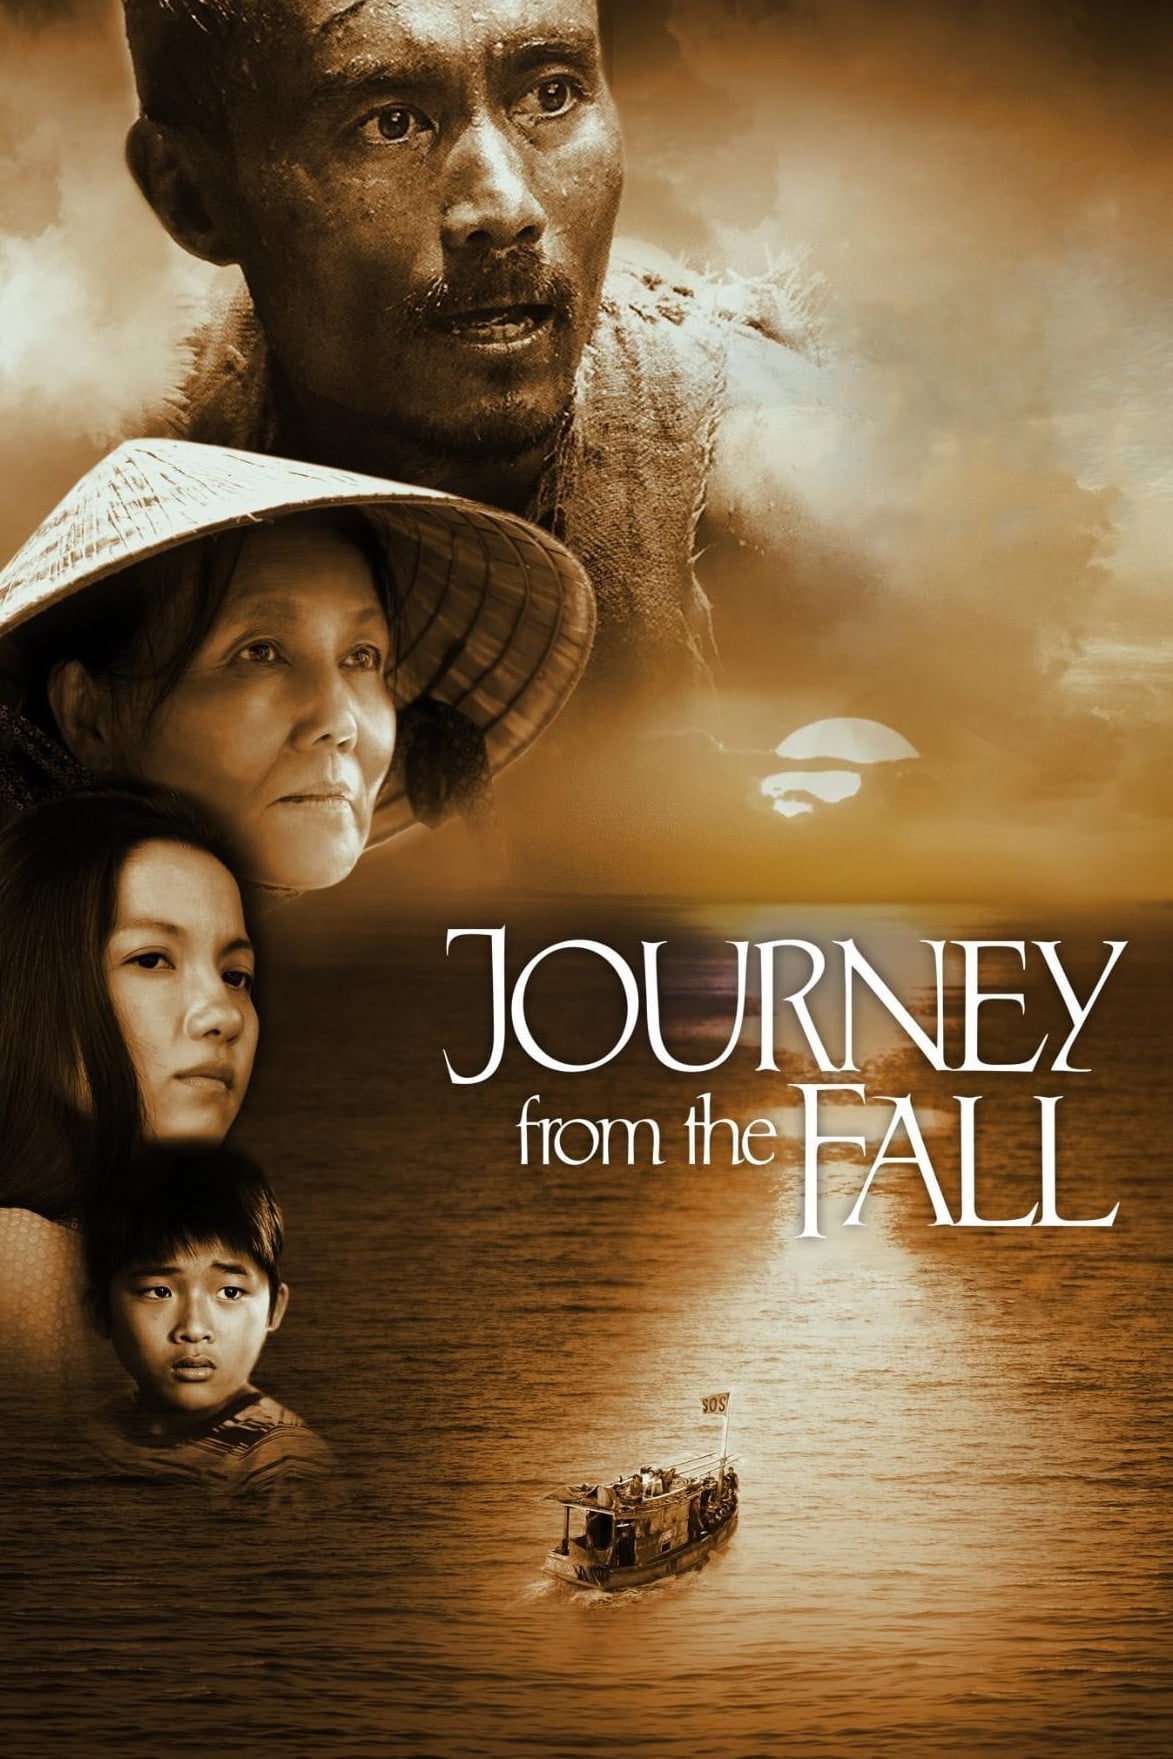 JOURNEY FROM THE FALL